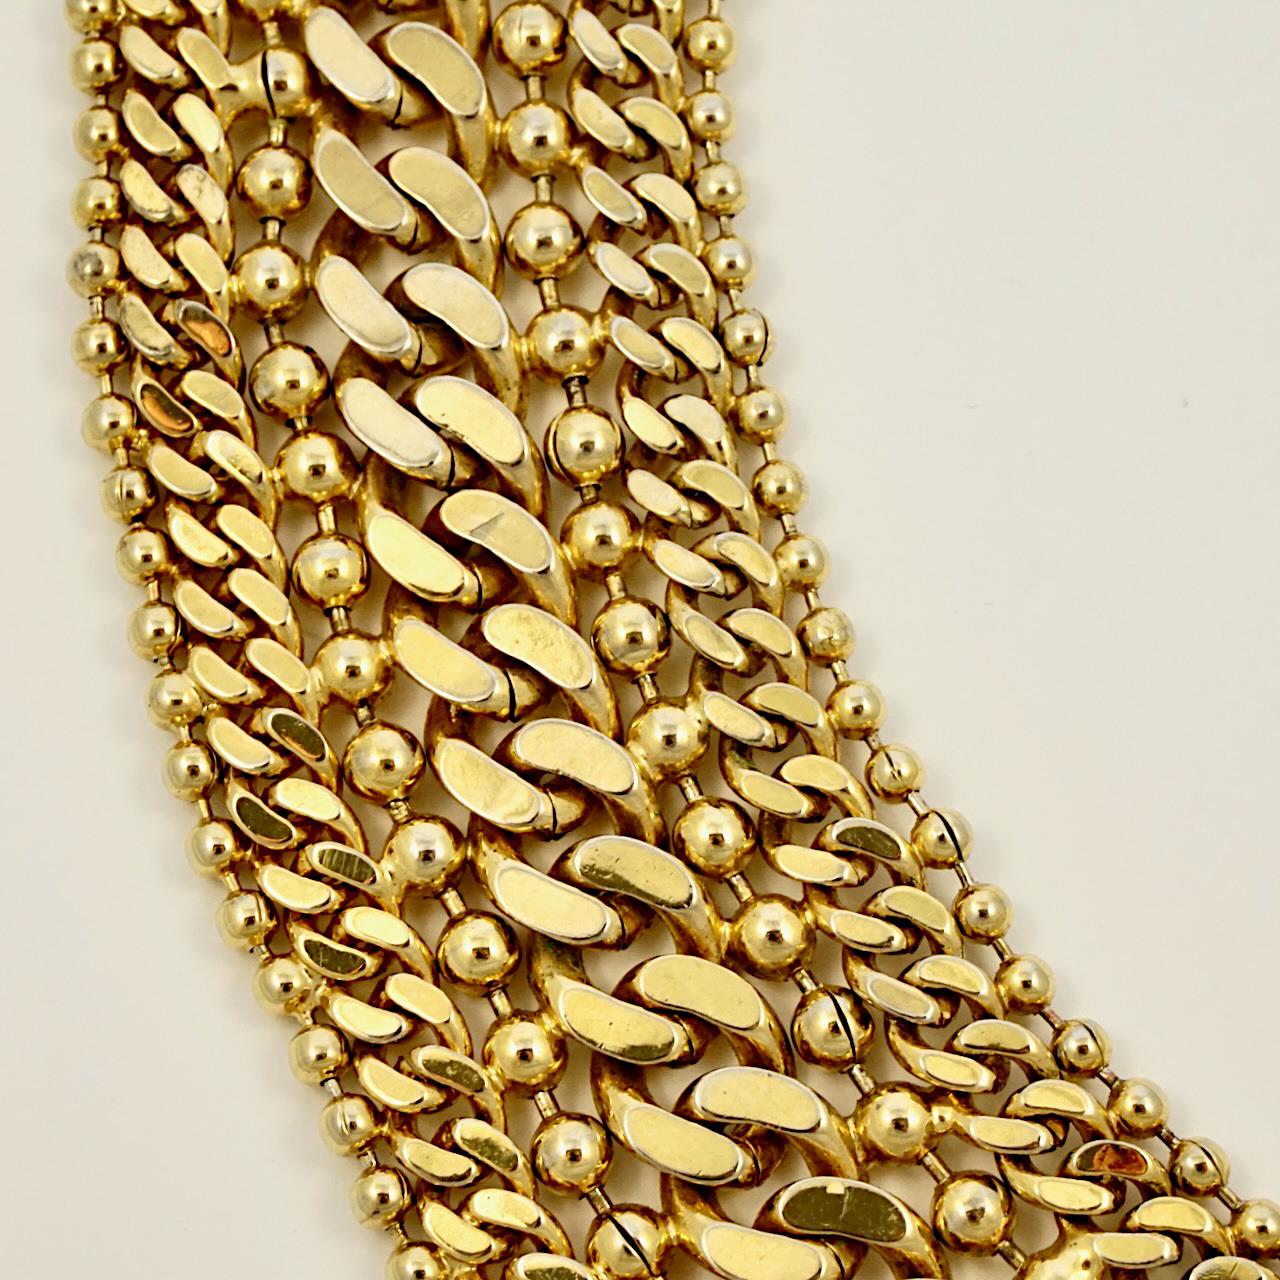 
Monet fabulous 22ct triple gold plated curb and ball link chain necklace. Measuring length approximately 50.8 cm / 20 inches by width 3.7 cm / 1.45 inch. The necklace is in very good condition. There is some wear to the gold plating.

This is a